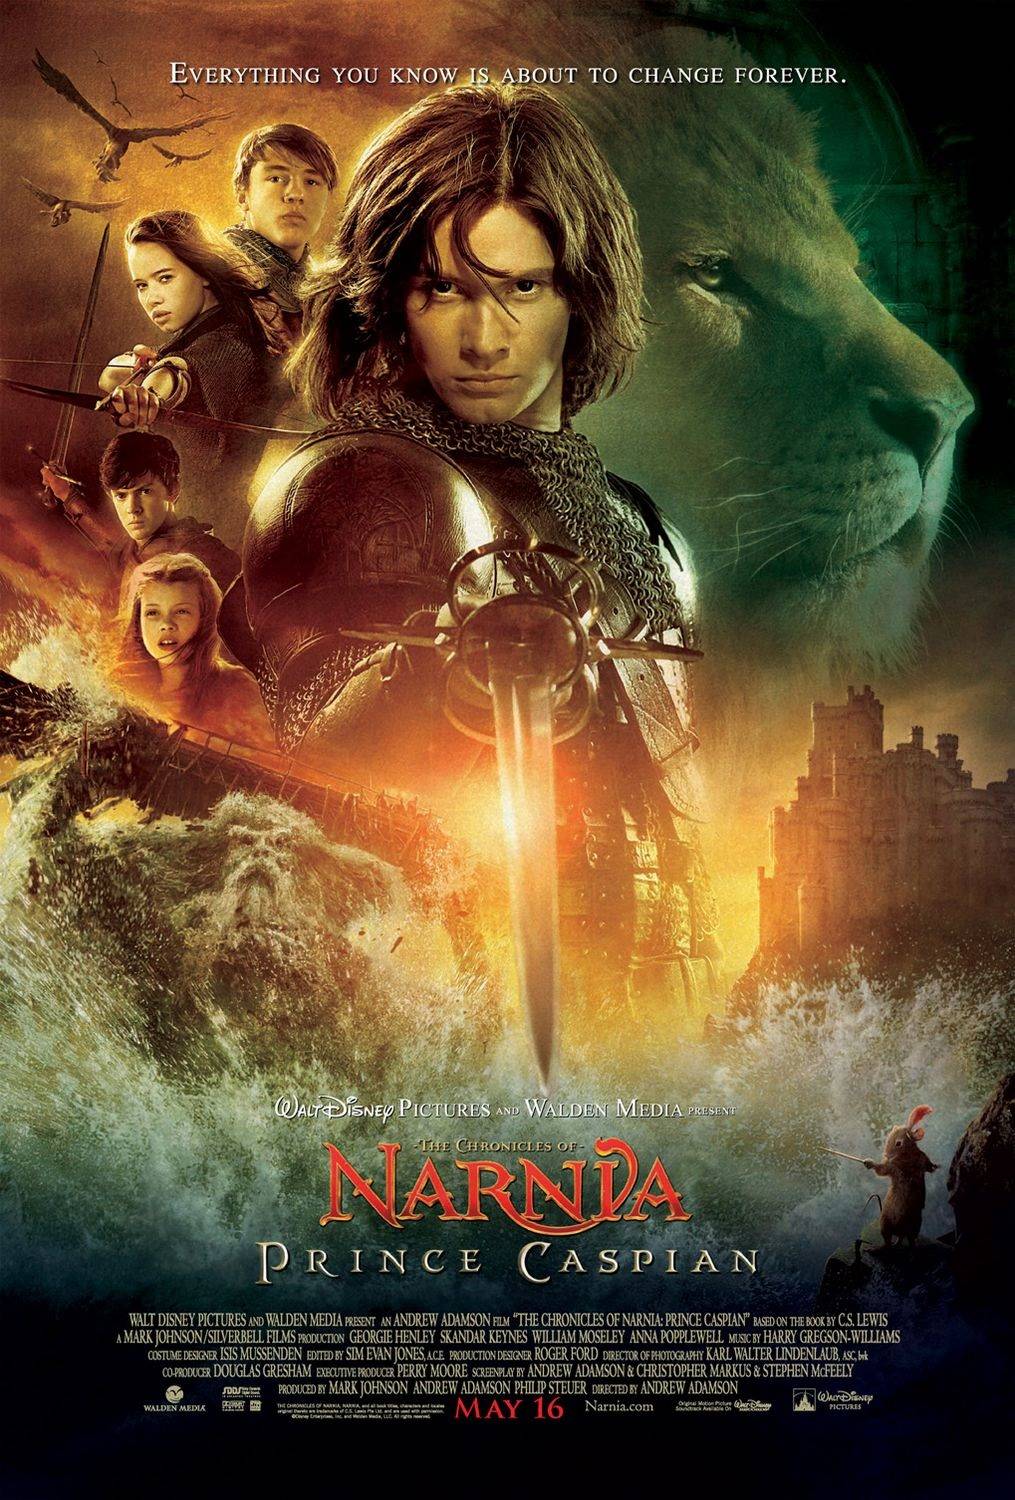 Image of "The Chronicles of Narnia: Prince Caspian"